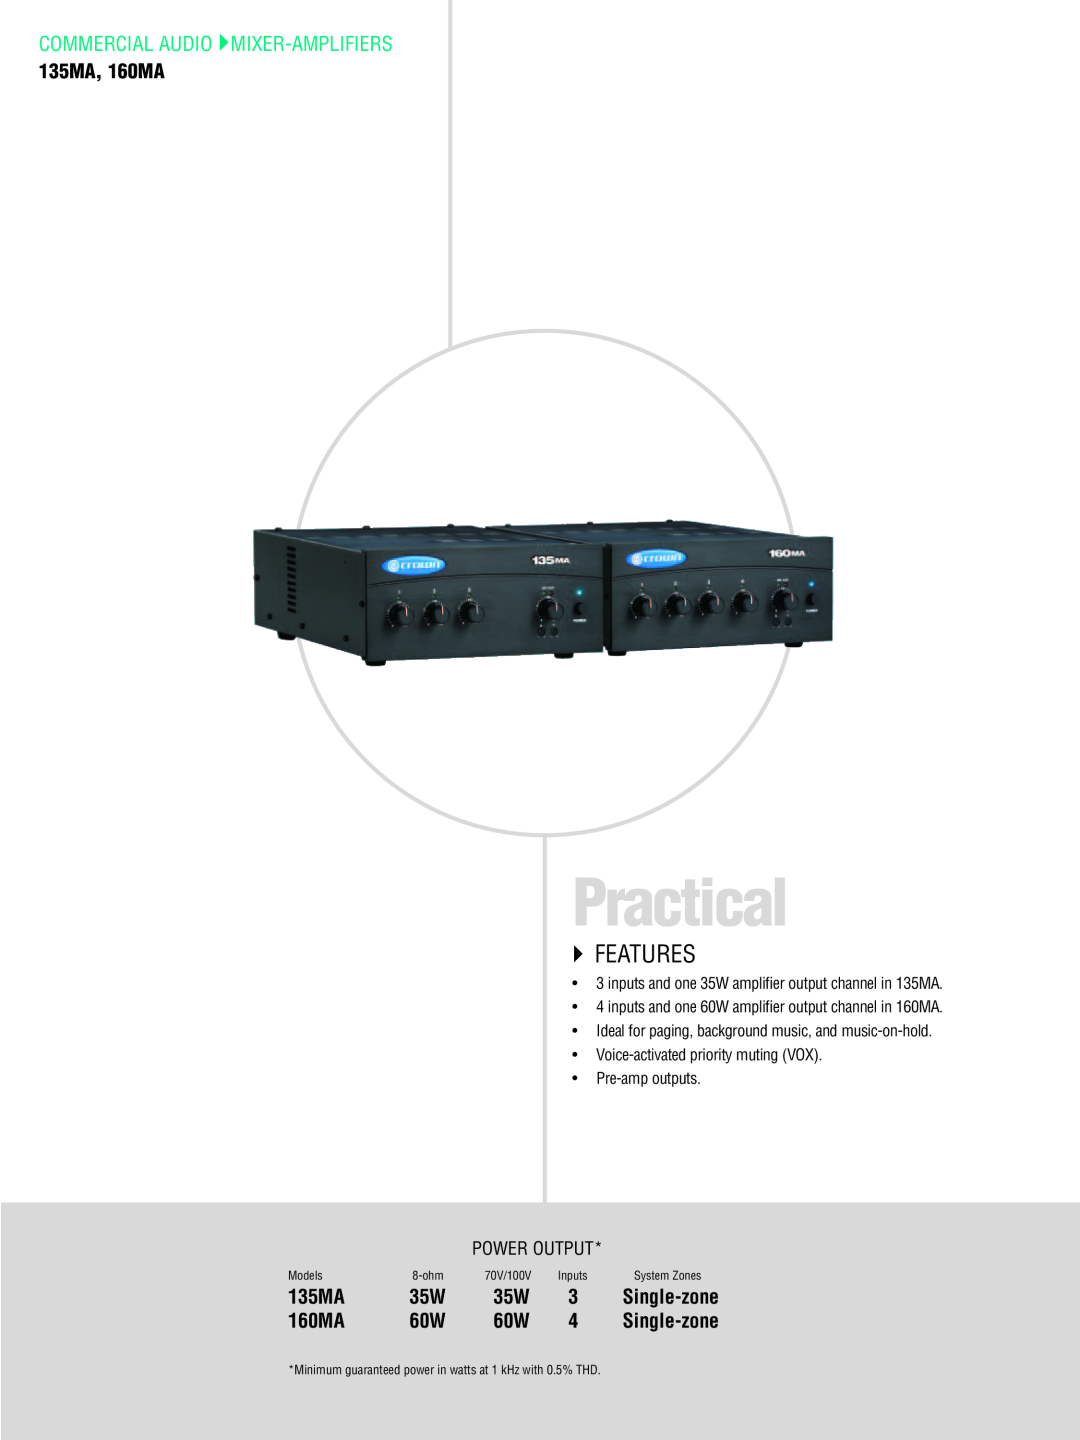 Crown CTS 3000, CTS 2000, CTS 1200 Practical, `` Features, Commercial Audio Mixer-Amplifiers, 135MA, 160MA, Power Output 